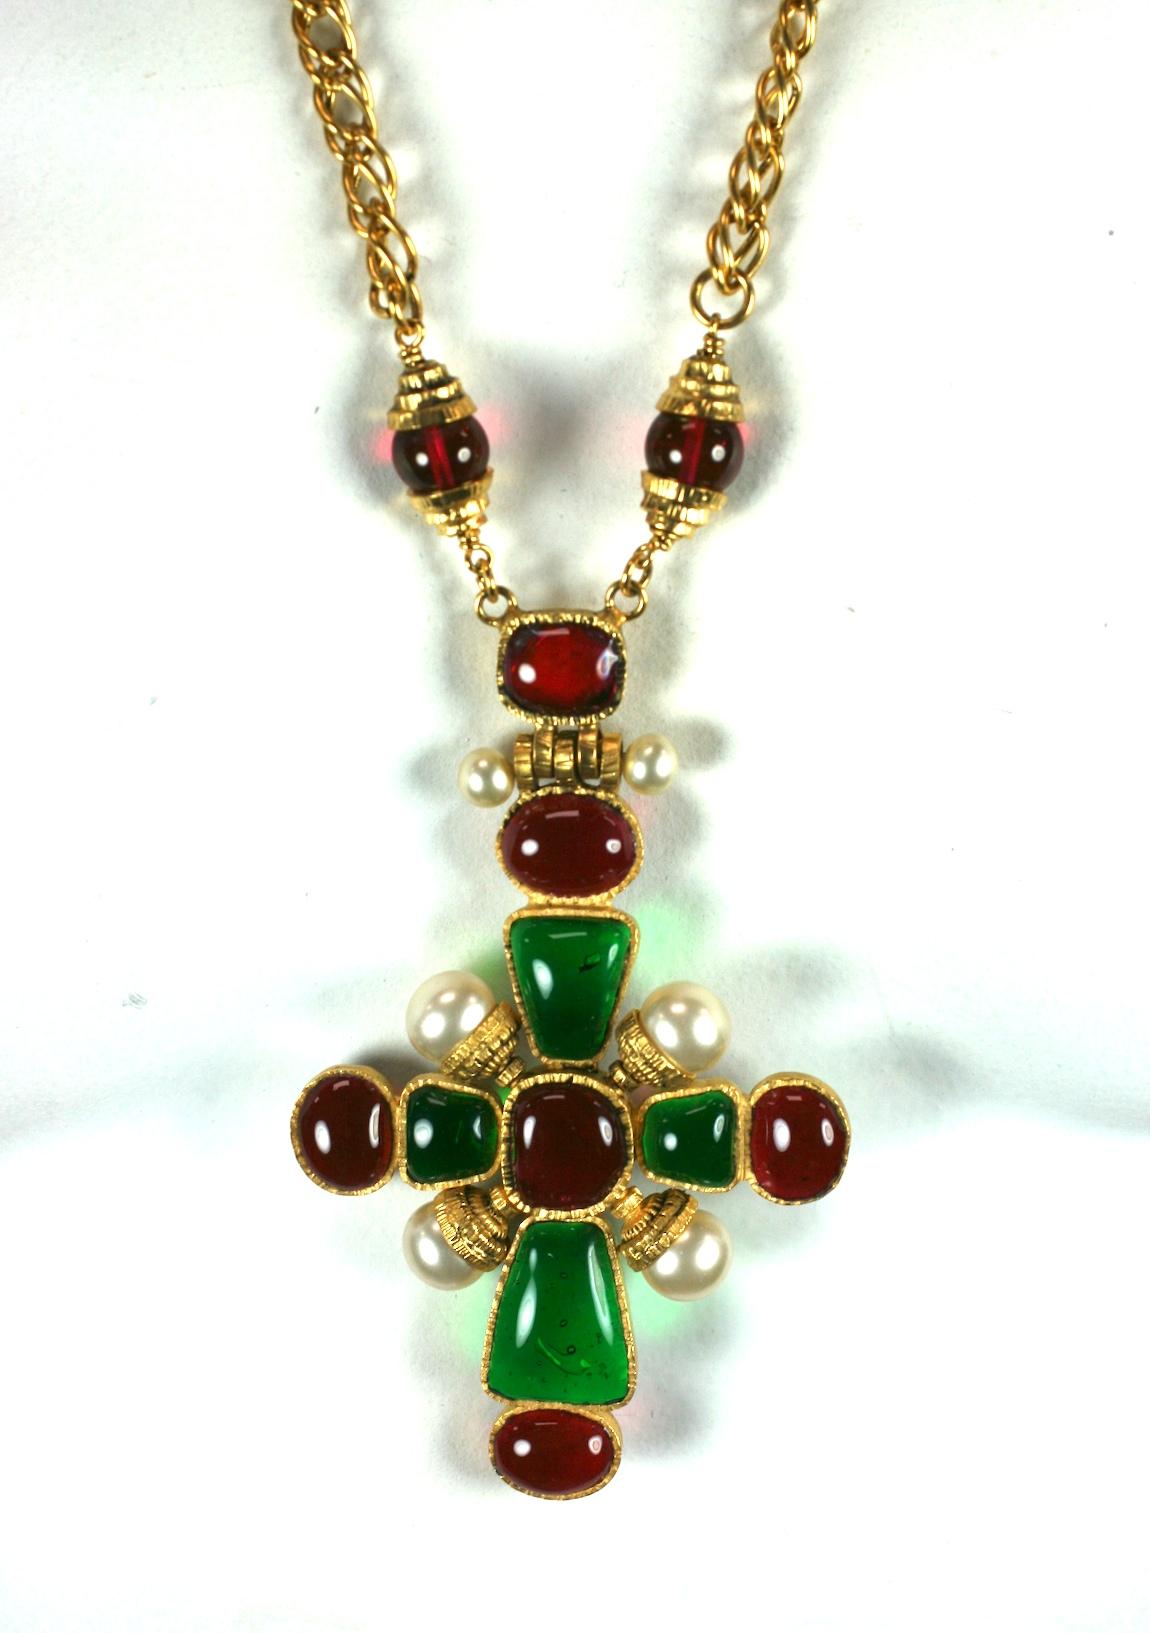 Iconic cross necklace by Karl Lagerfeld for Chanel. Emerald and Ruby poured glass are mixed with handmade  faux pearls for this Renaissance style cross. A heavy gilt rolo chain is spaced with ruby beads. Made by the Maison Gripoix studio in Paris.